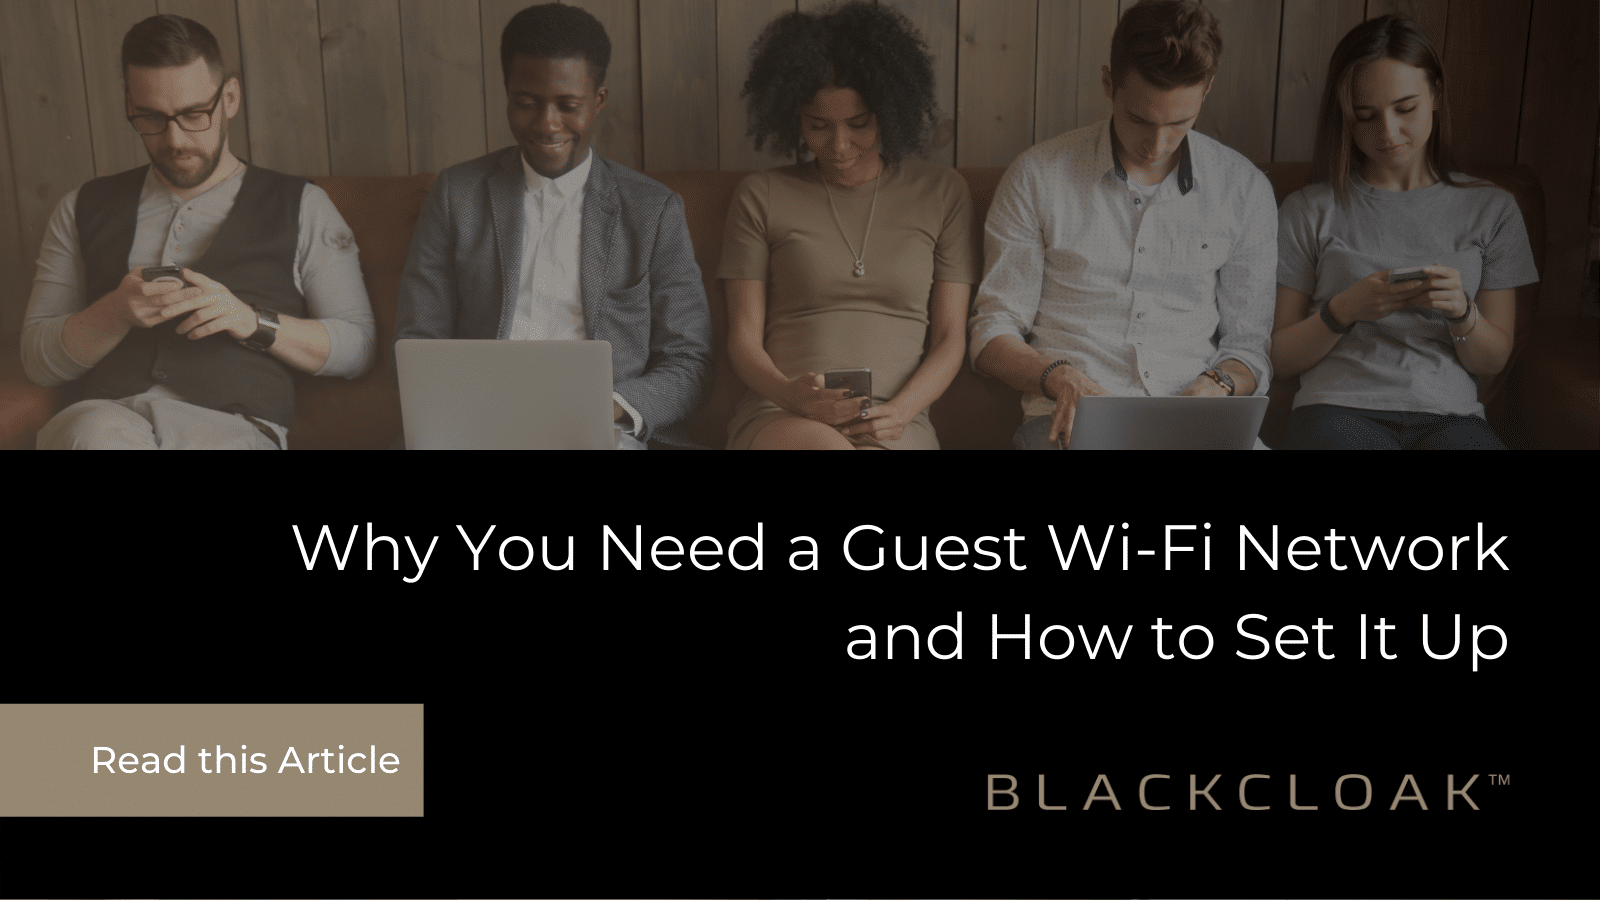 Why You Need a Guest Wi-Fi Network, and How to Set It Up